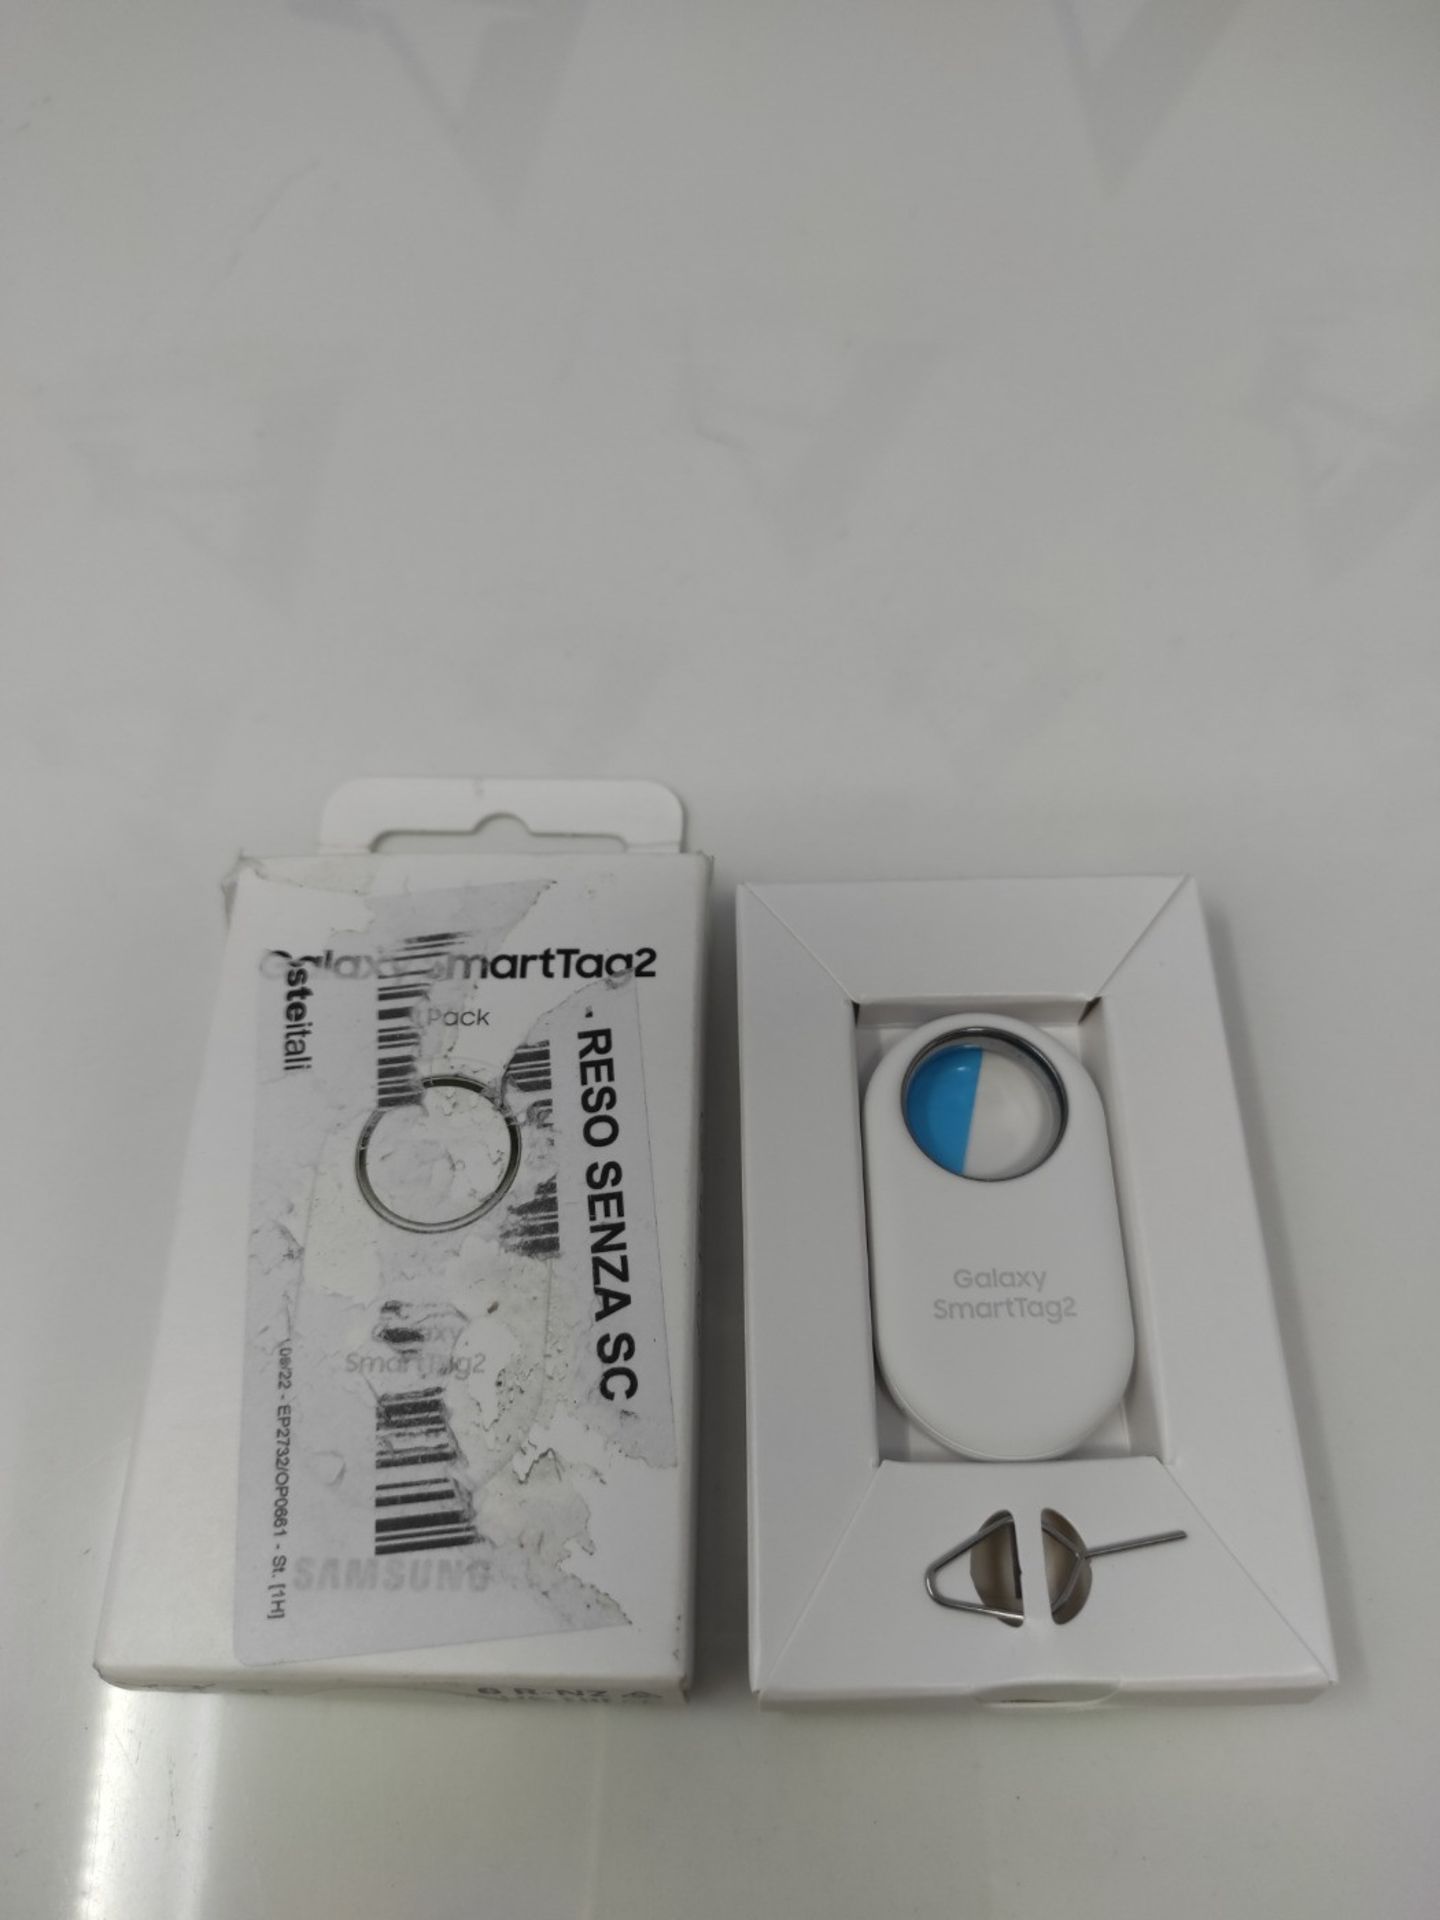 Samsung Galaxy SmartTag2 (1 Piece) Bluetooth Locator with Lost Mode, Compact Design, L - Image 2 of 2